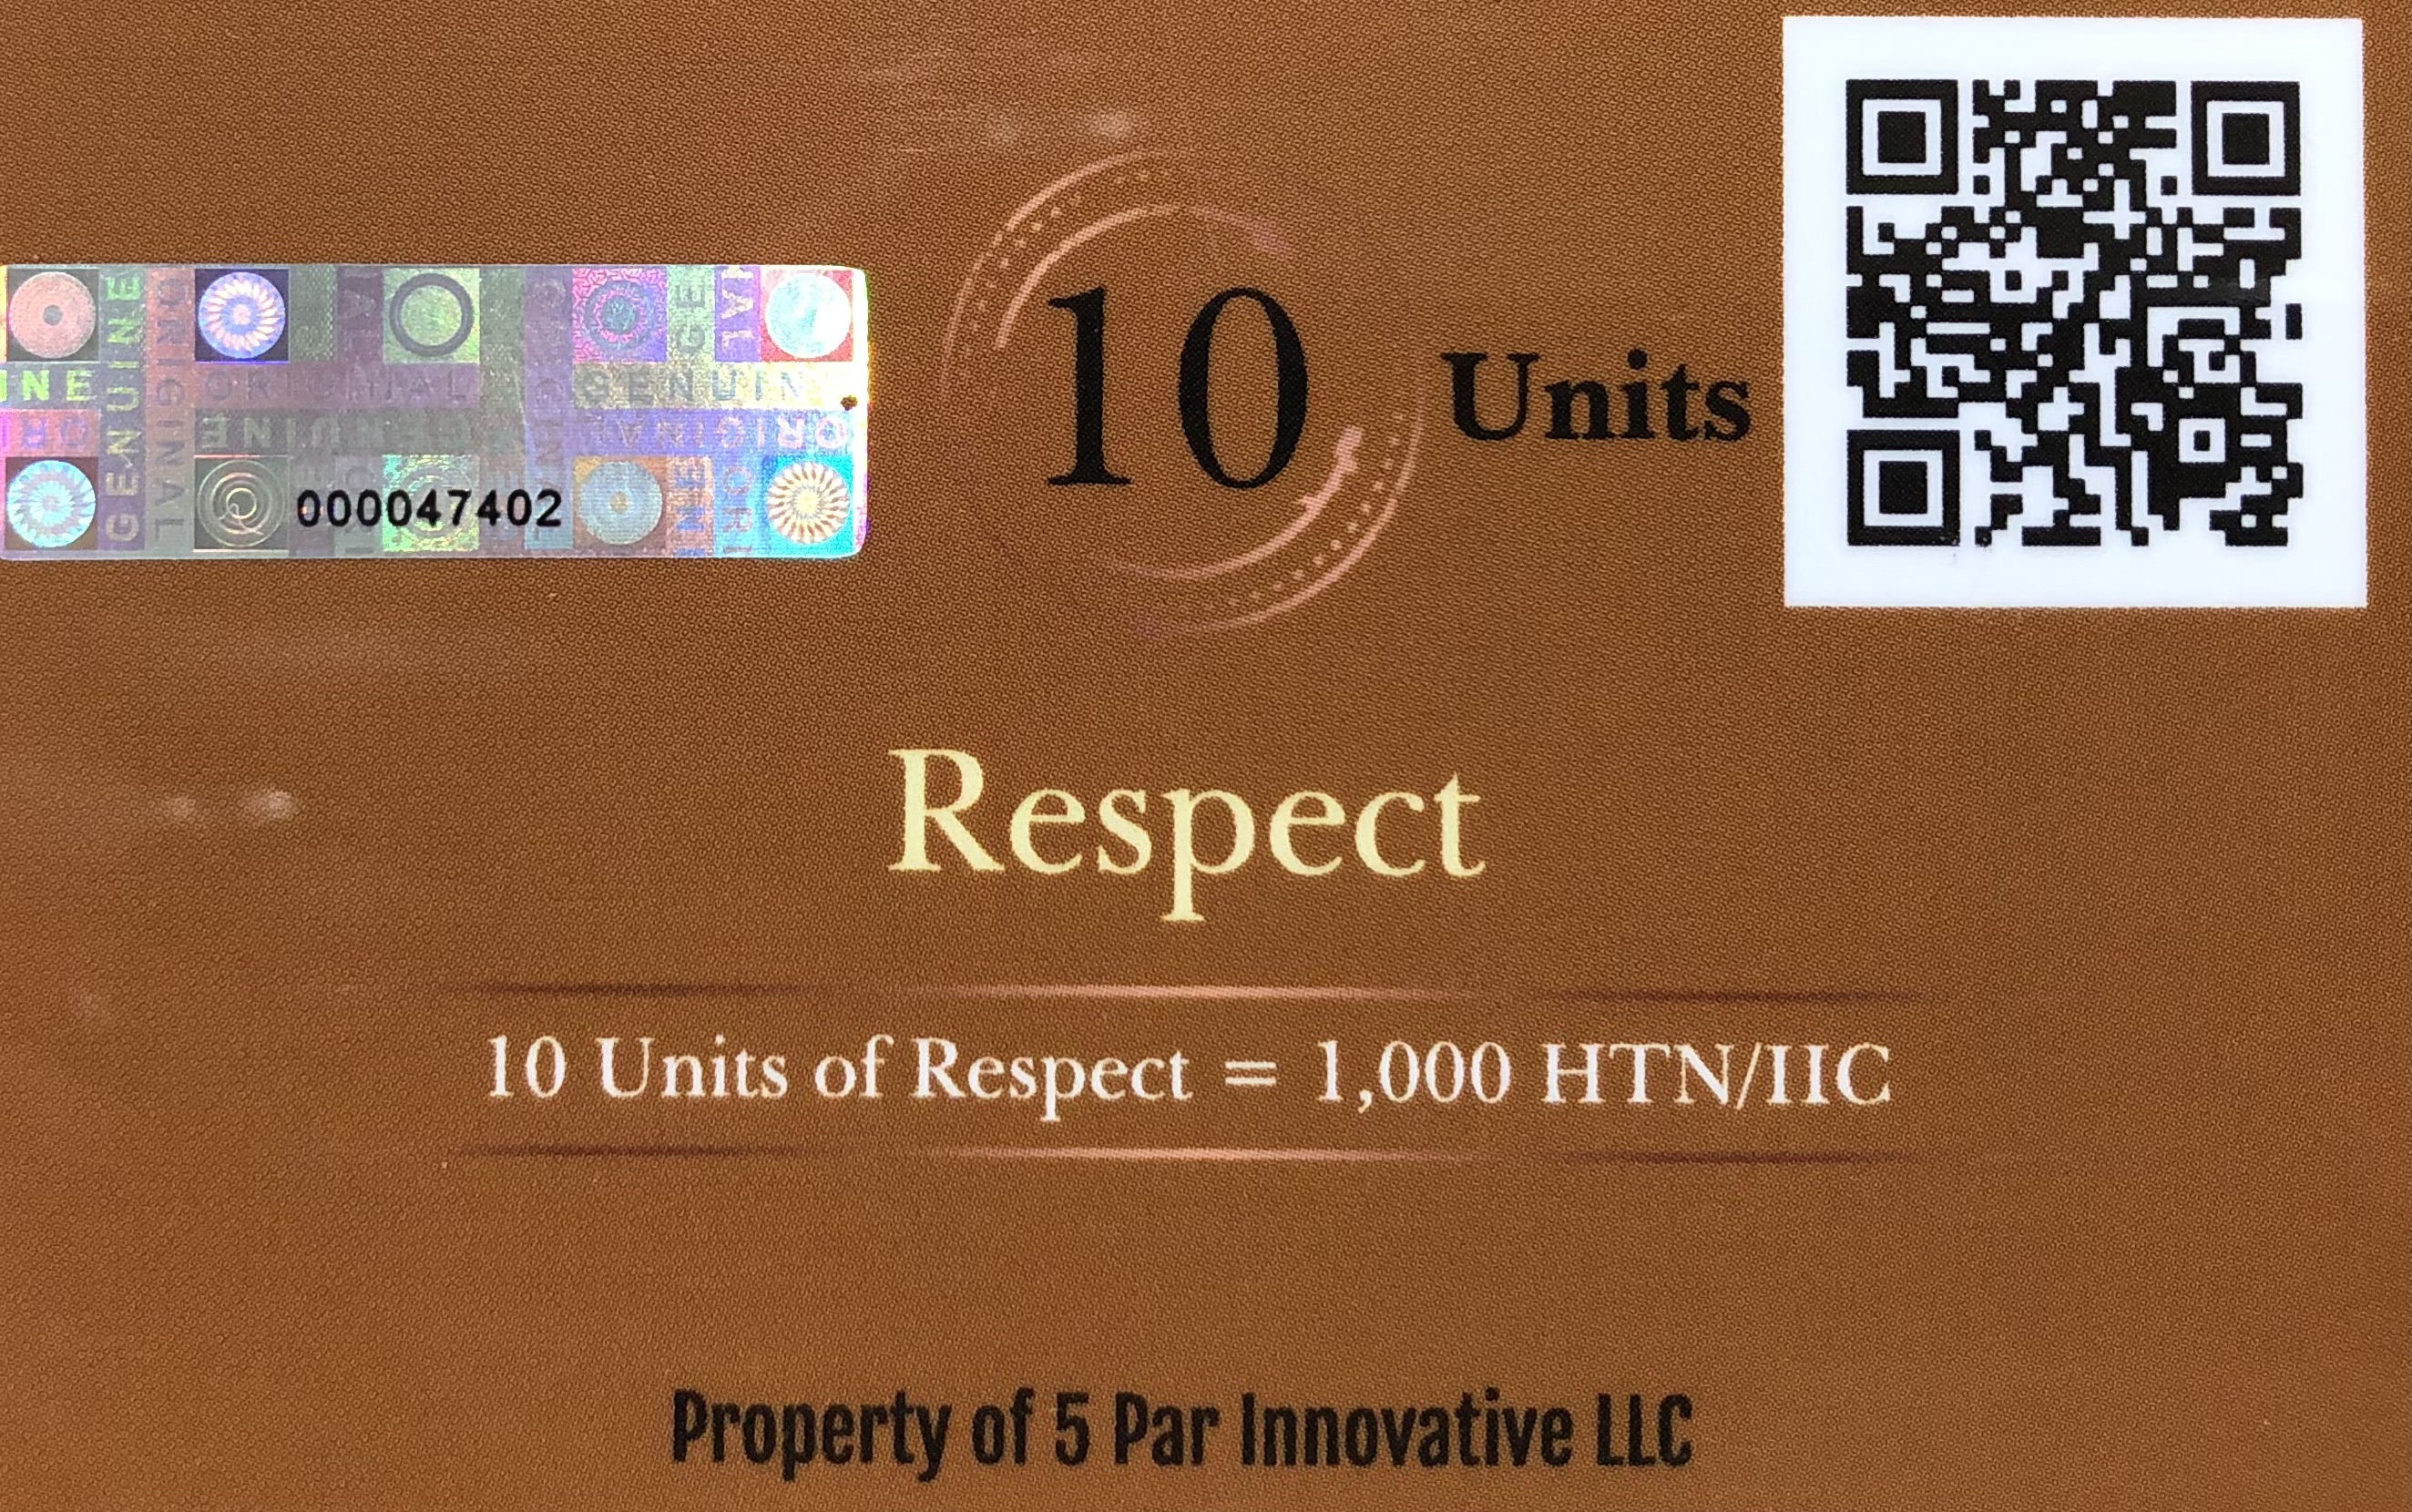 10 Units of Respect